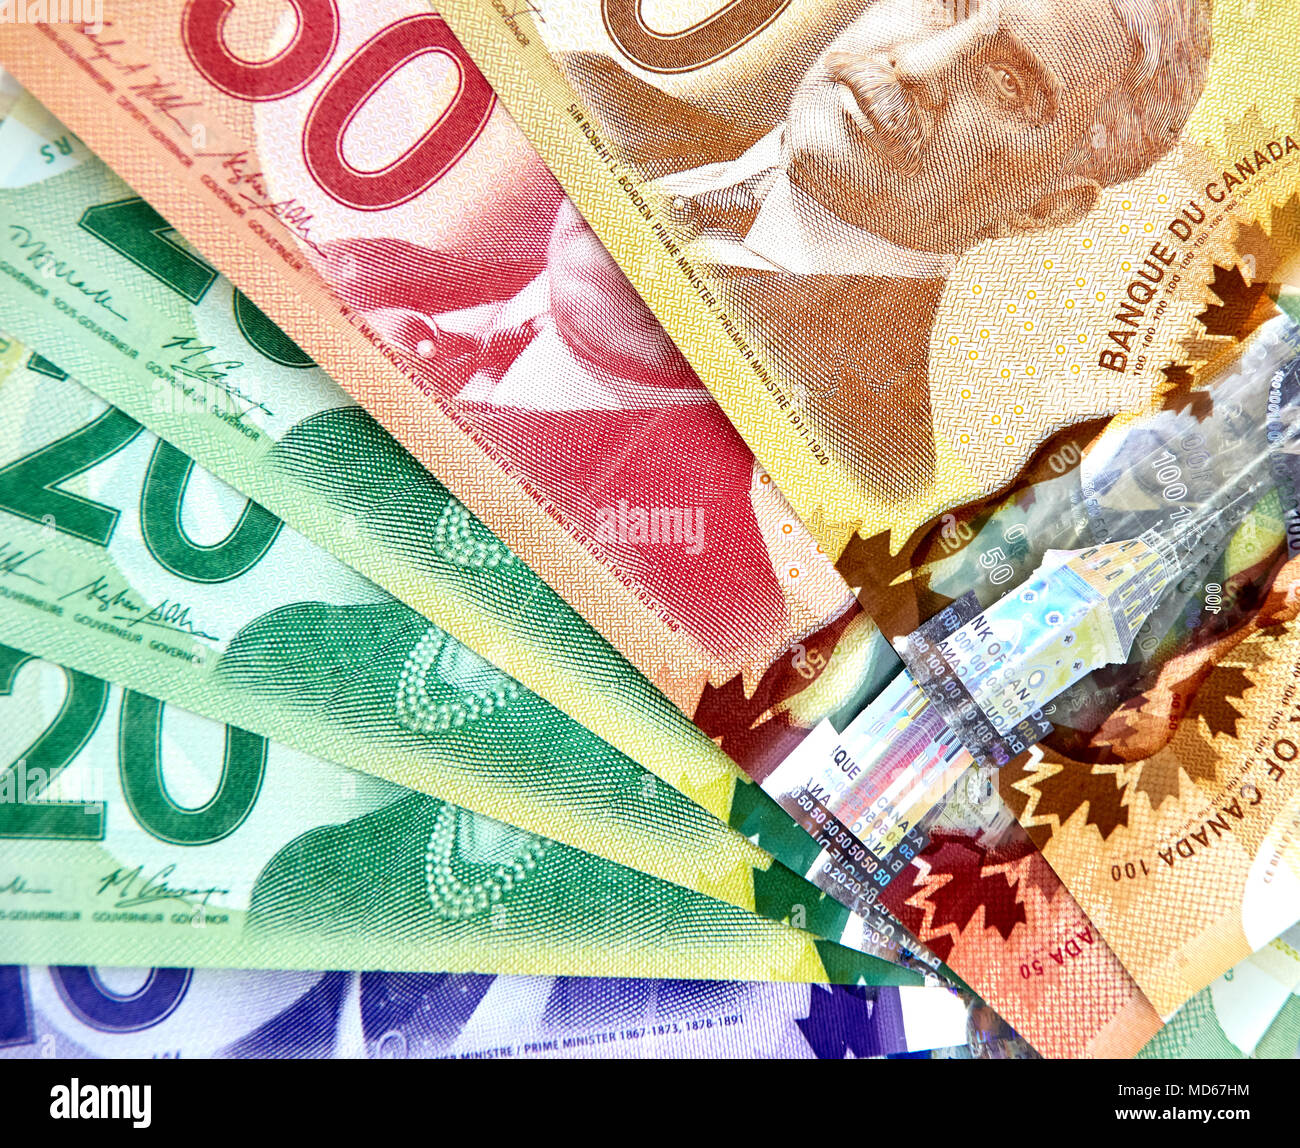 MONTREAL, CANADA - MARCH 10, 2018: Canadian bank notes, 20 and 50 dollars. Stock Photo